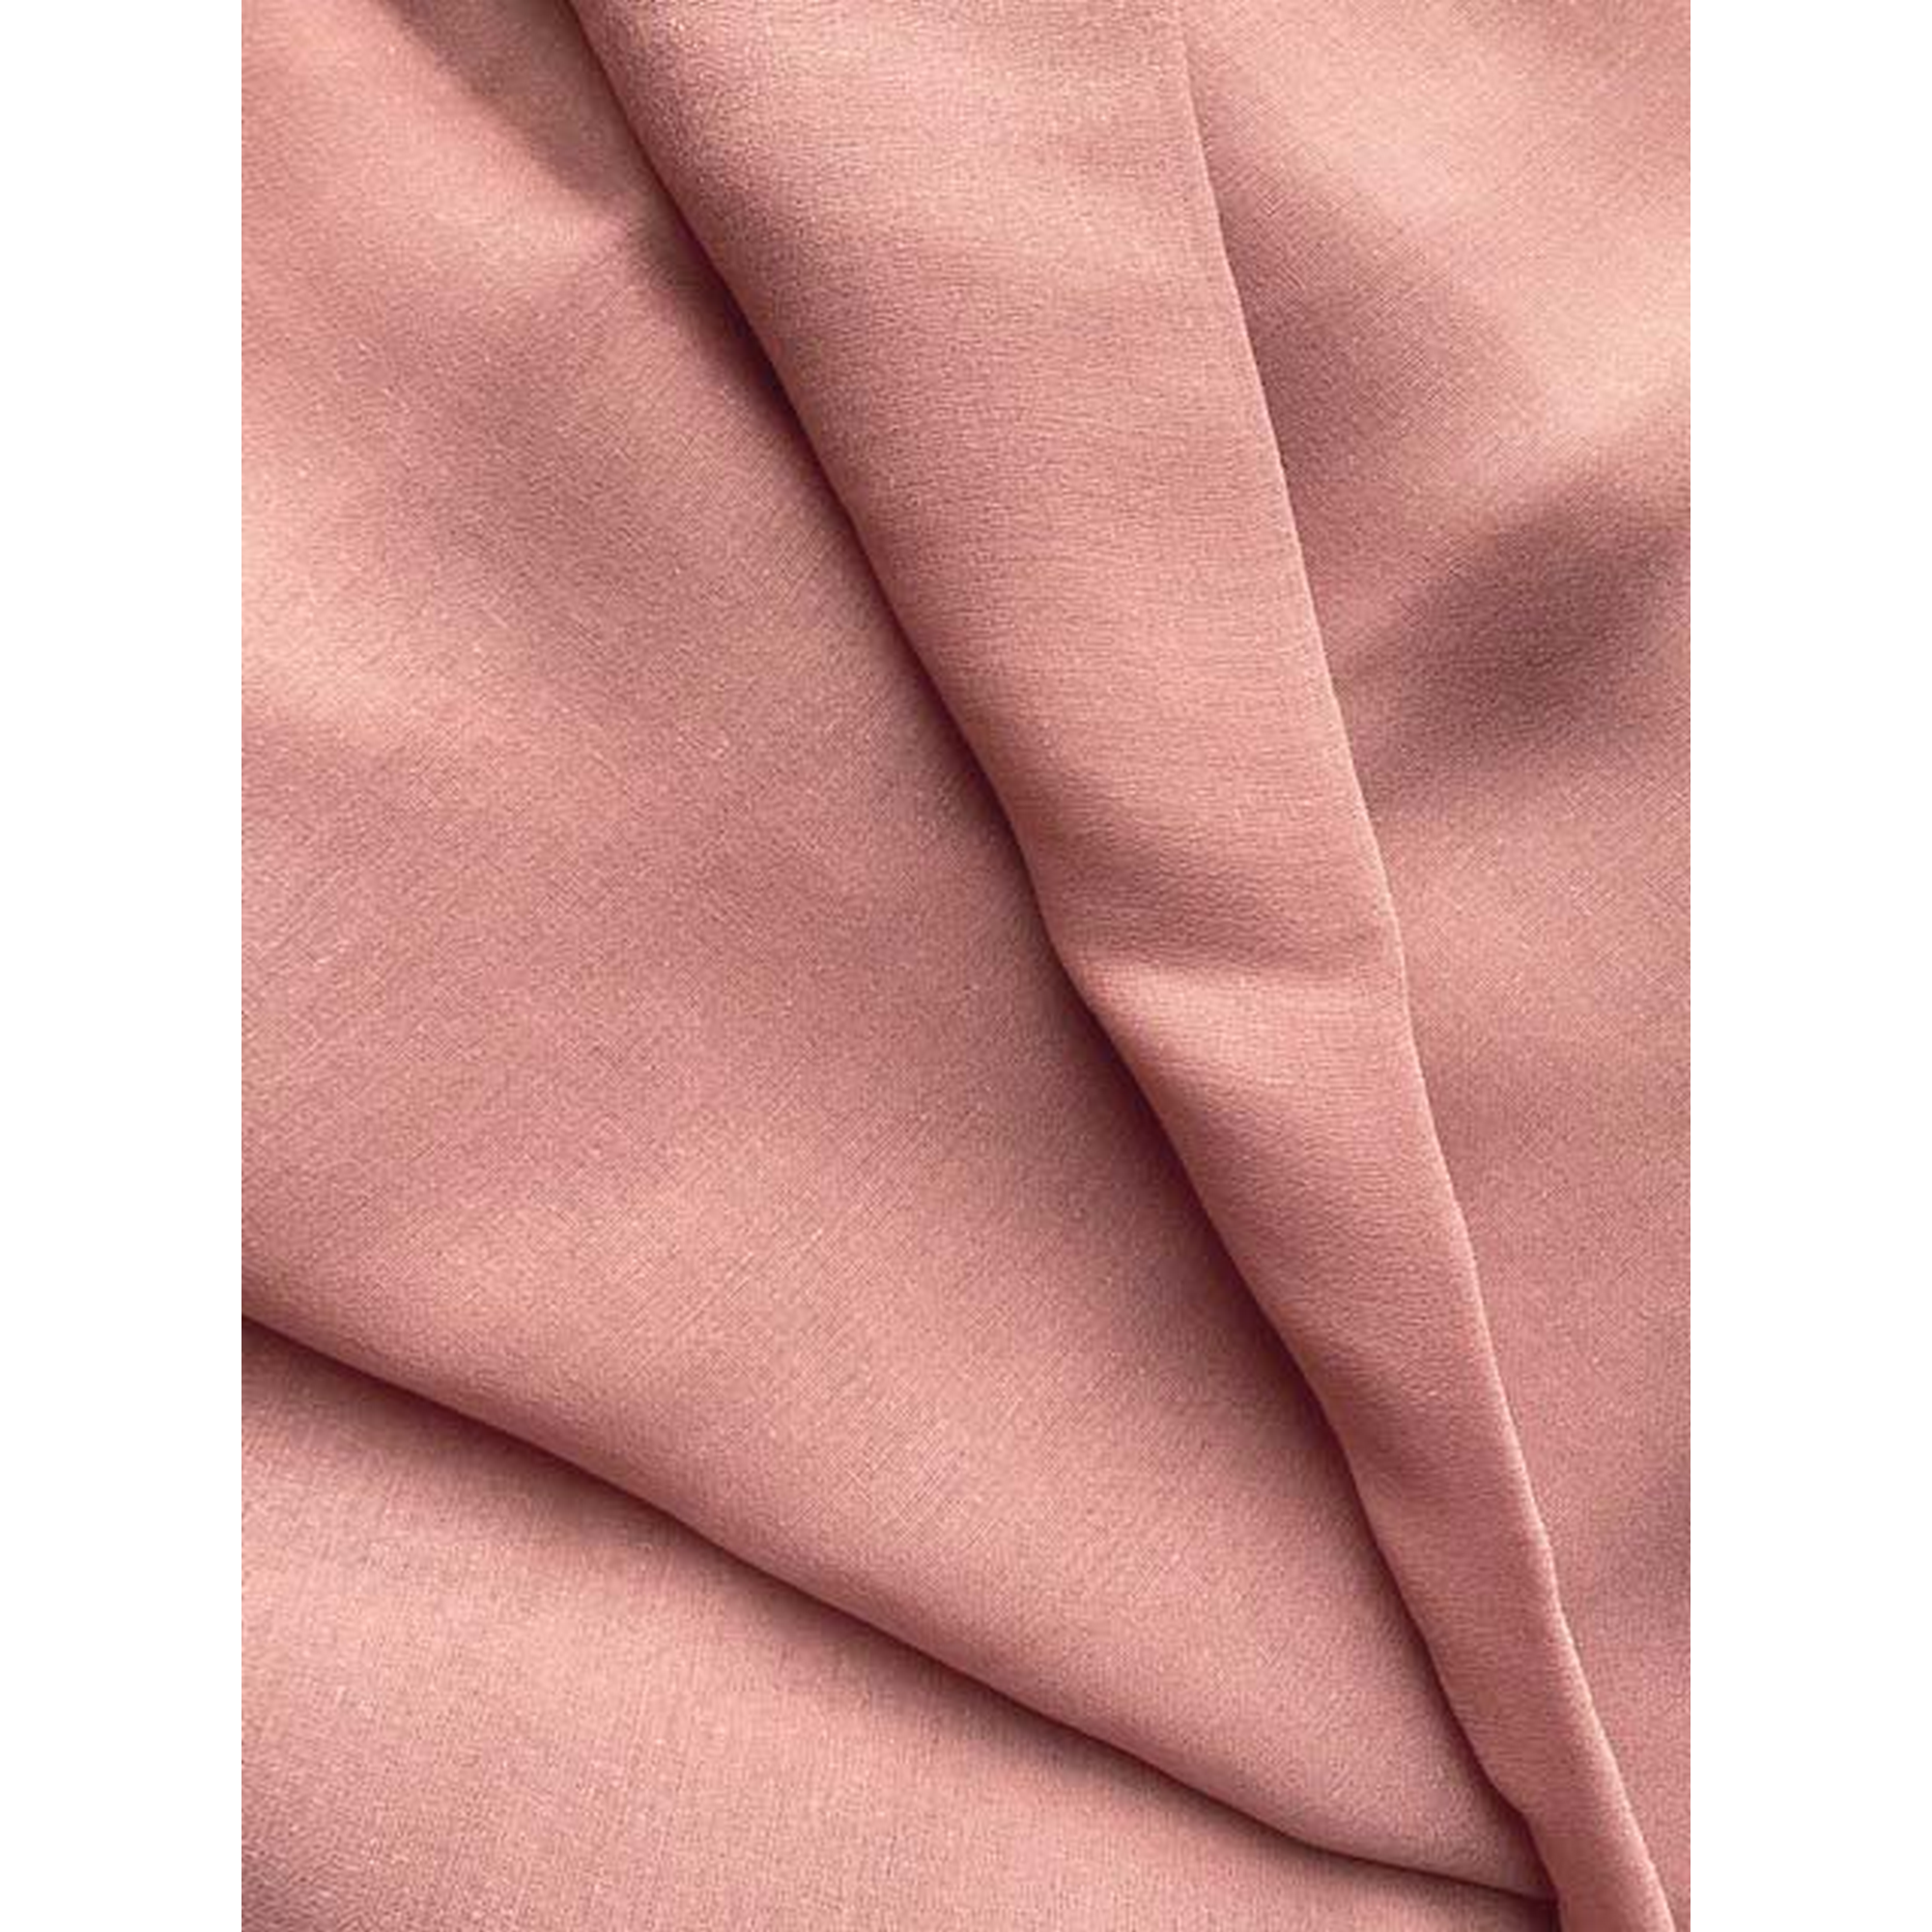 Schlaufenschal 'Air' rosa 140 x 255 cm + product picture